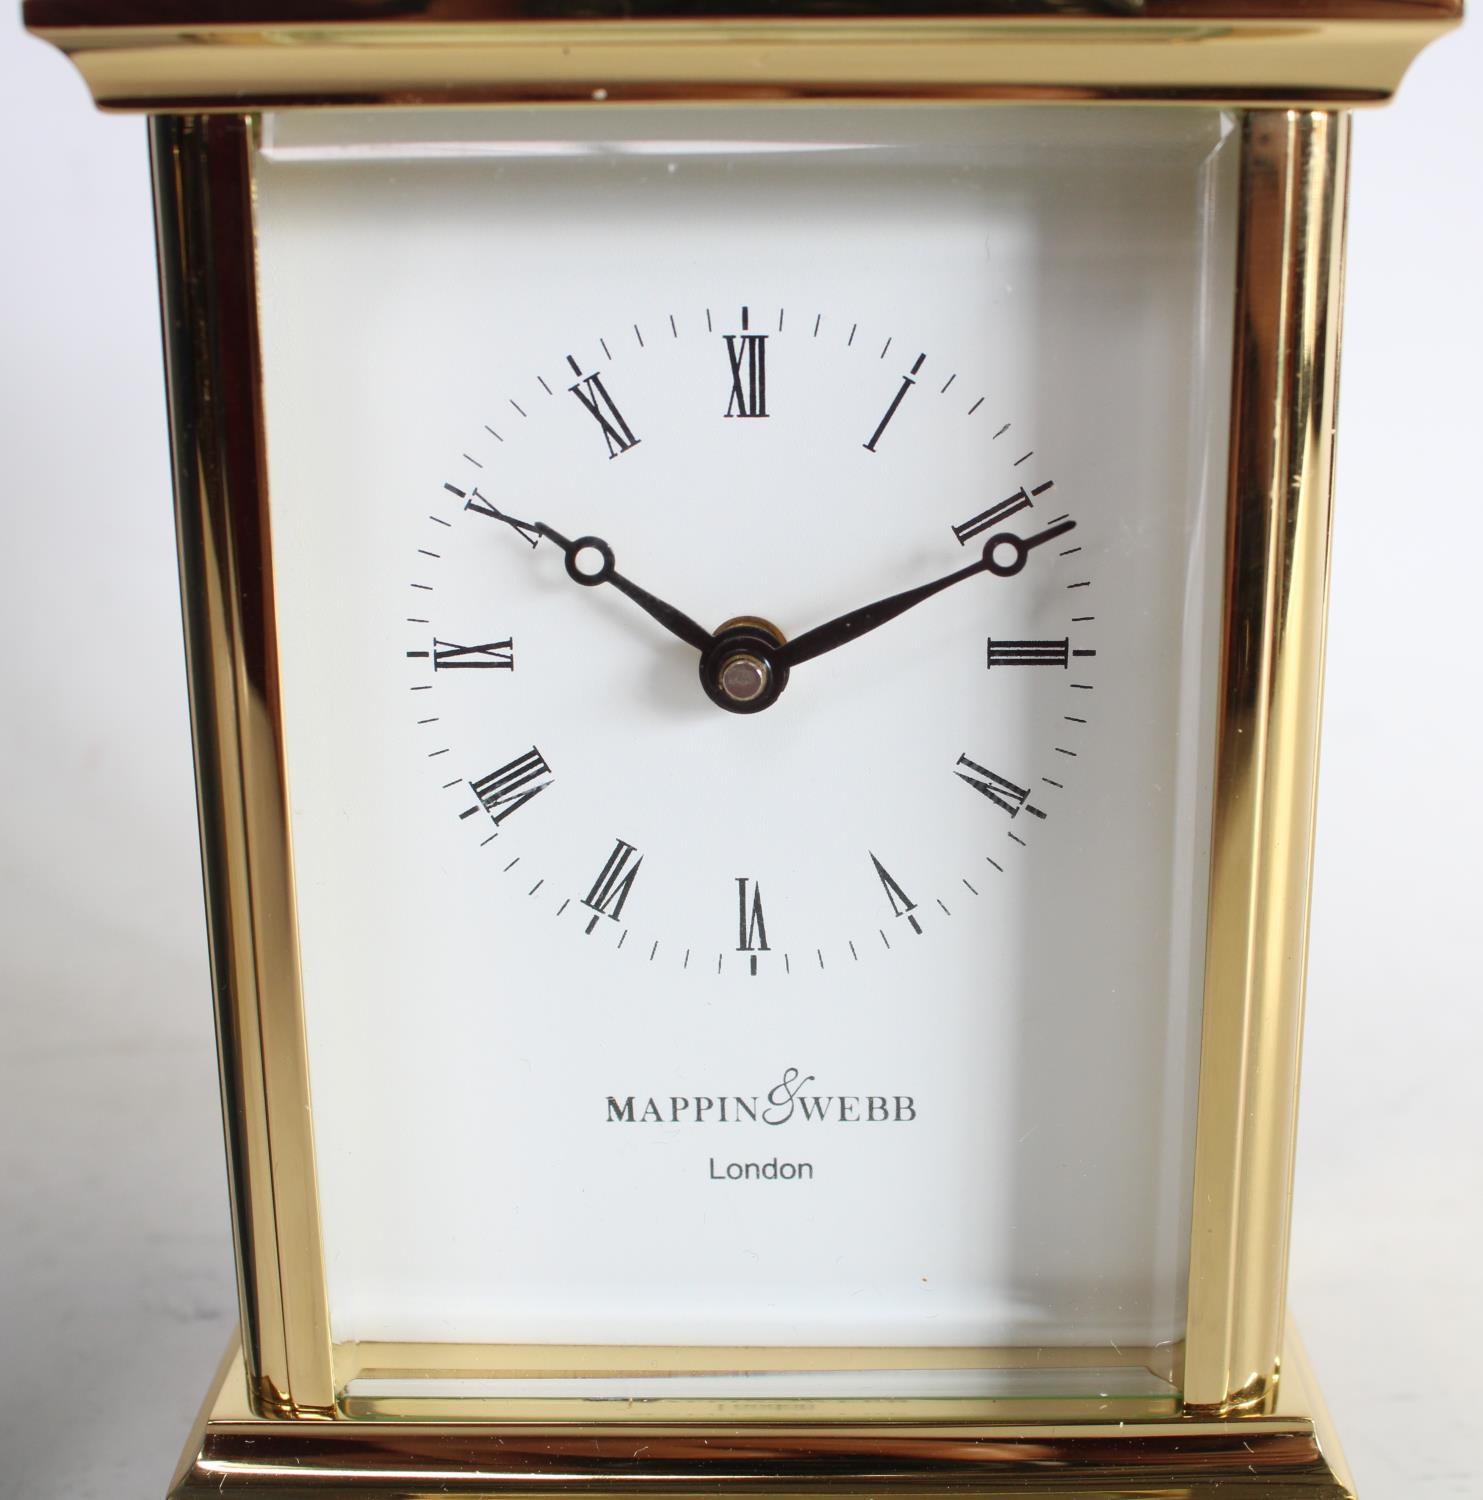 A Mapin and Webb carriage clock - Image 2 of 4